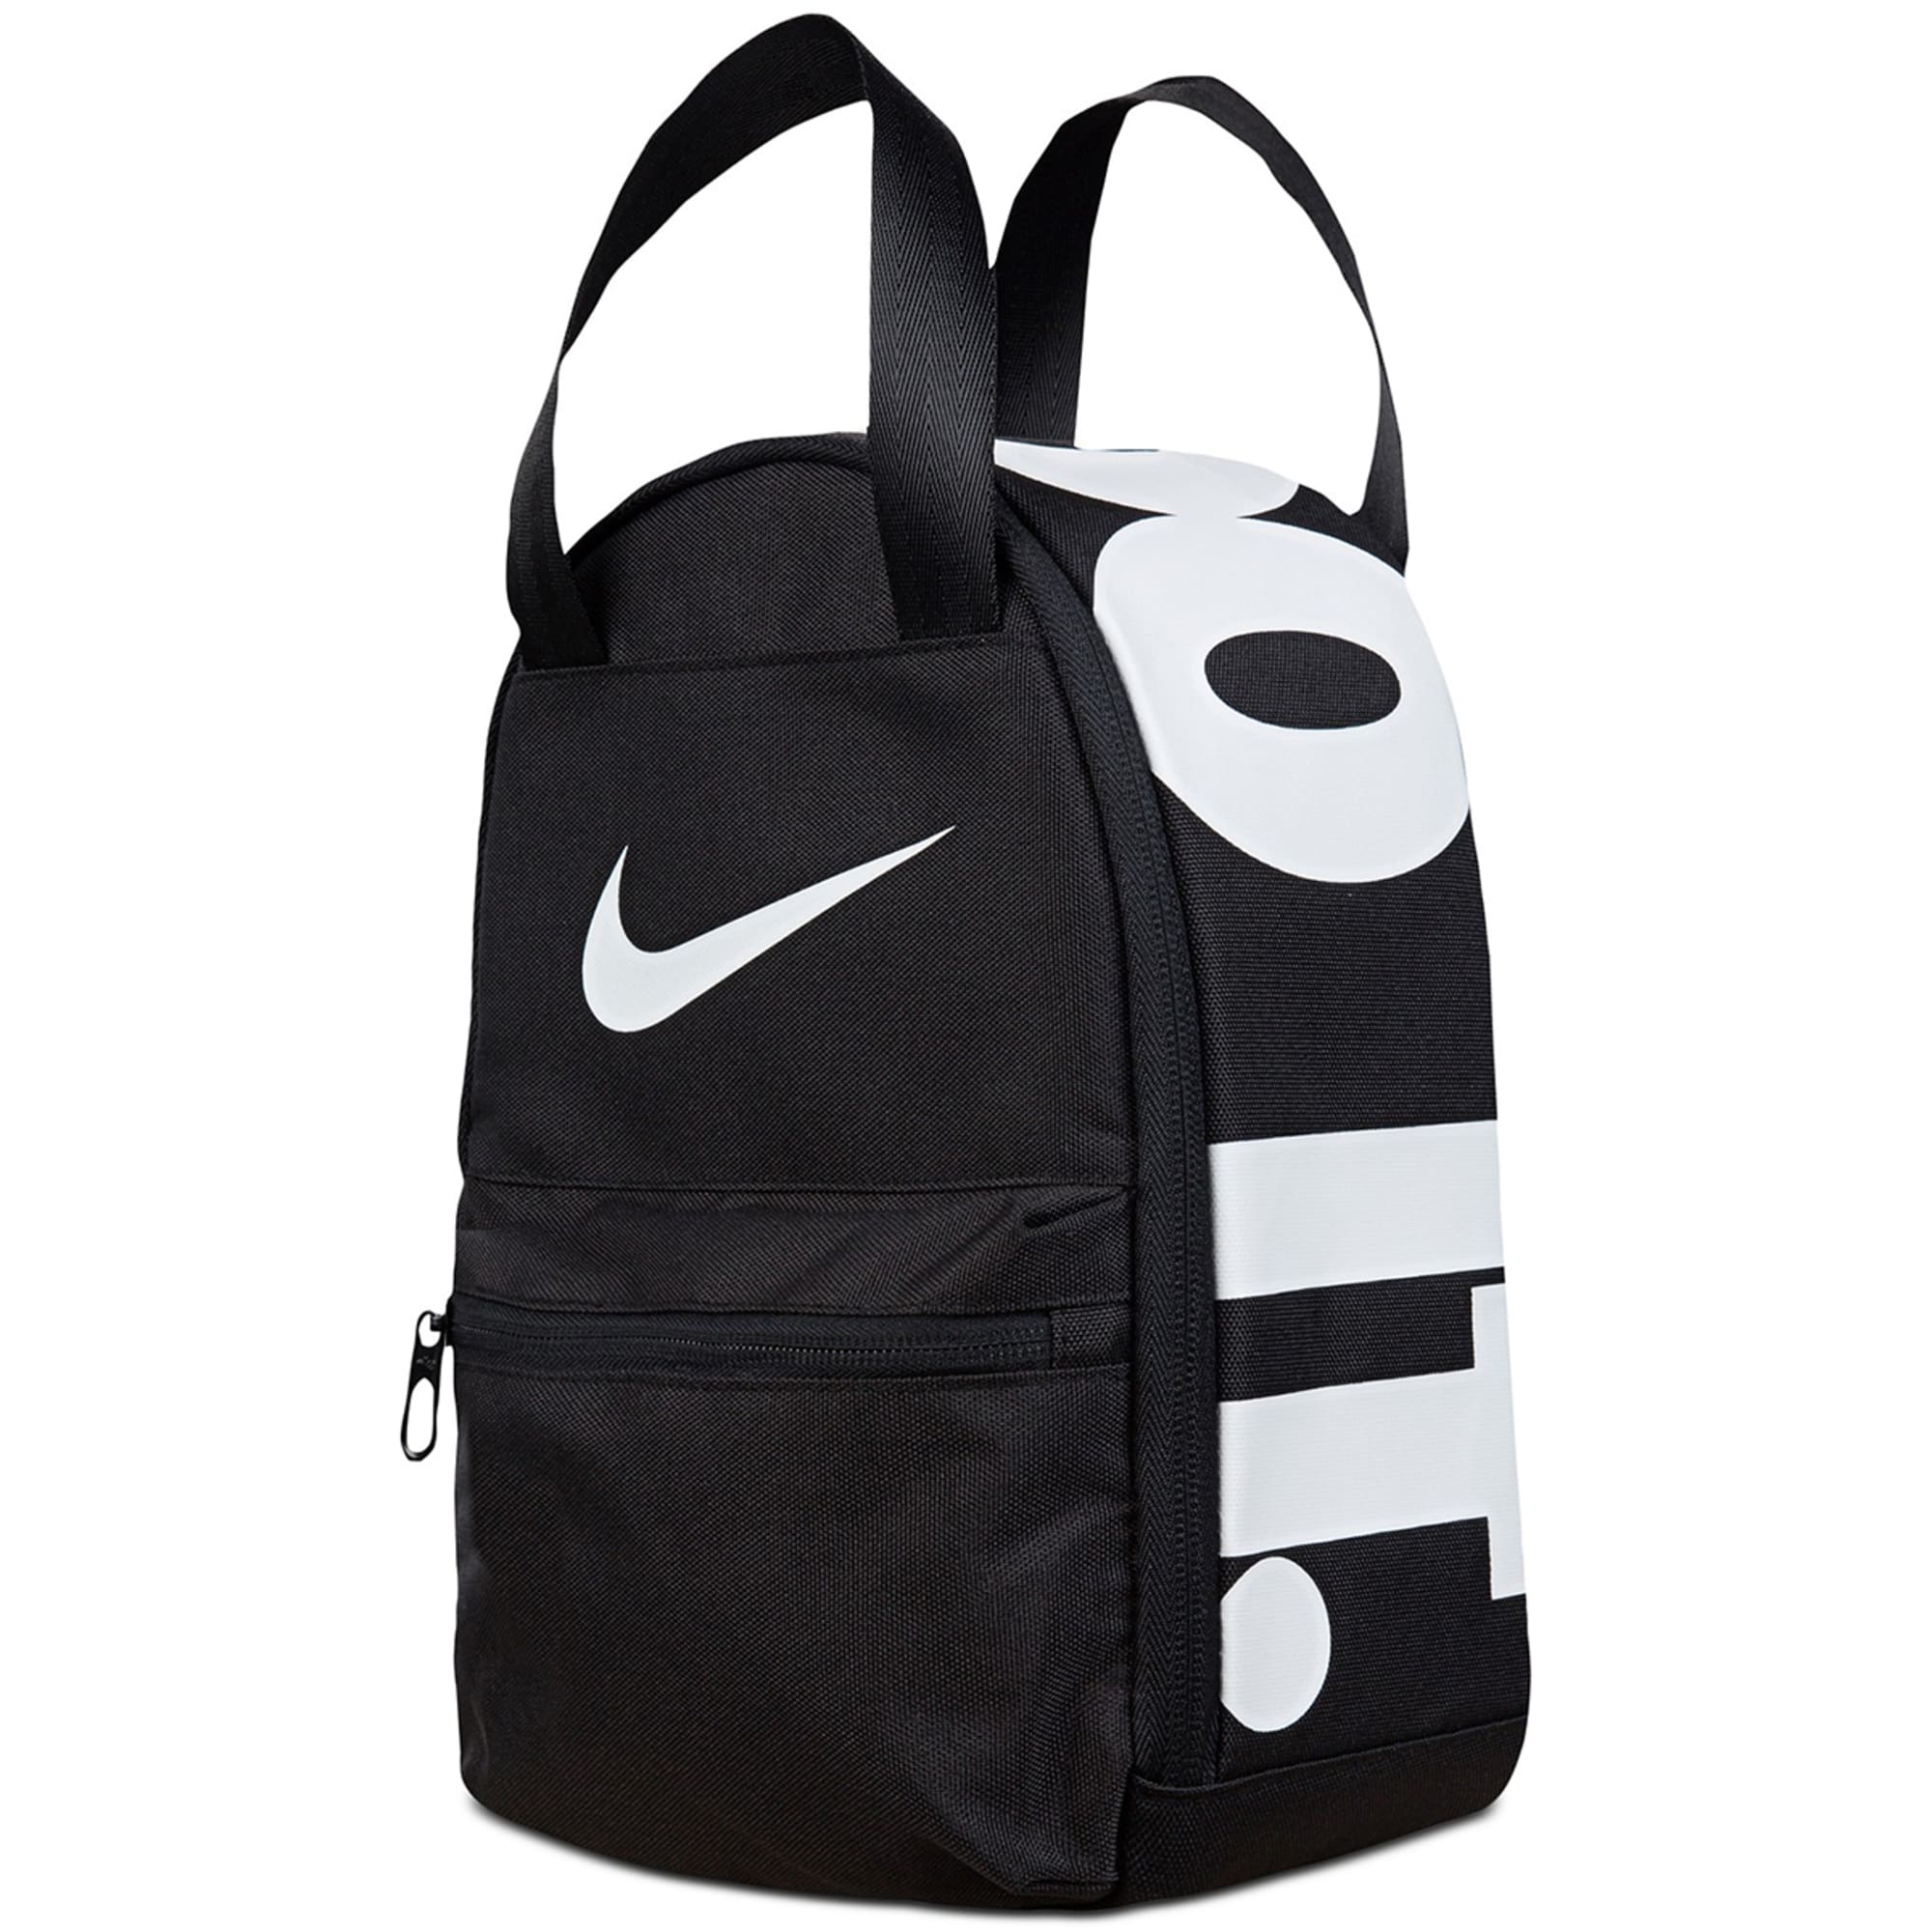 nike just do it expandable fuel pack lunch bag